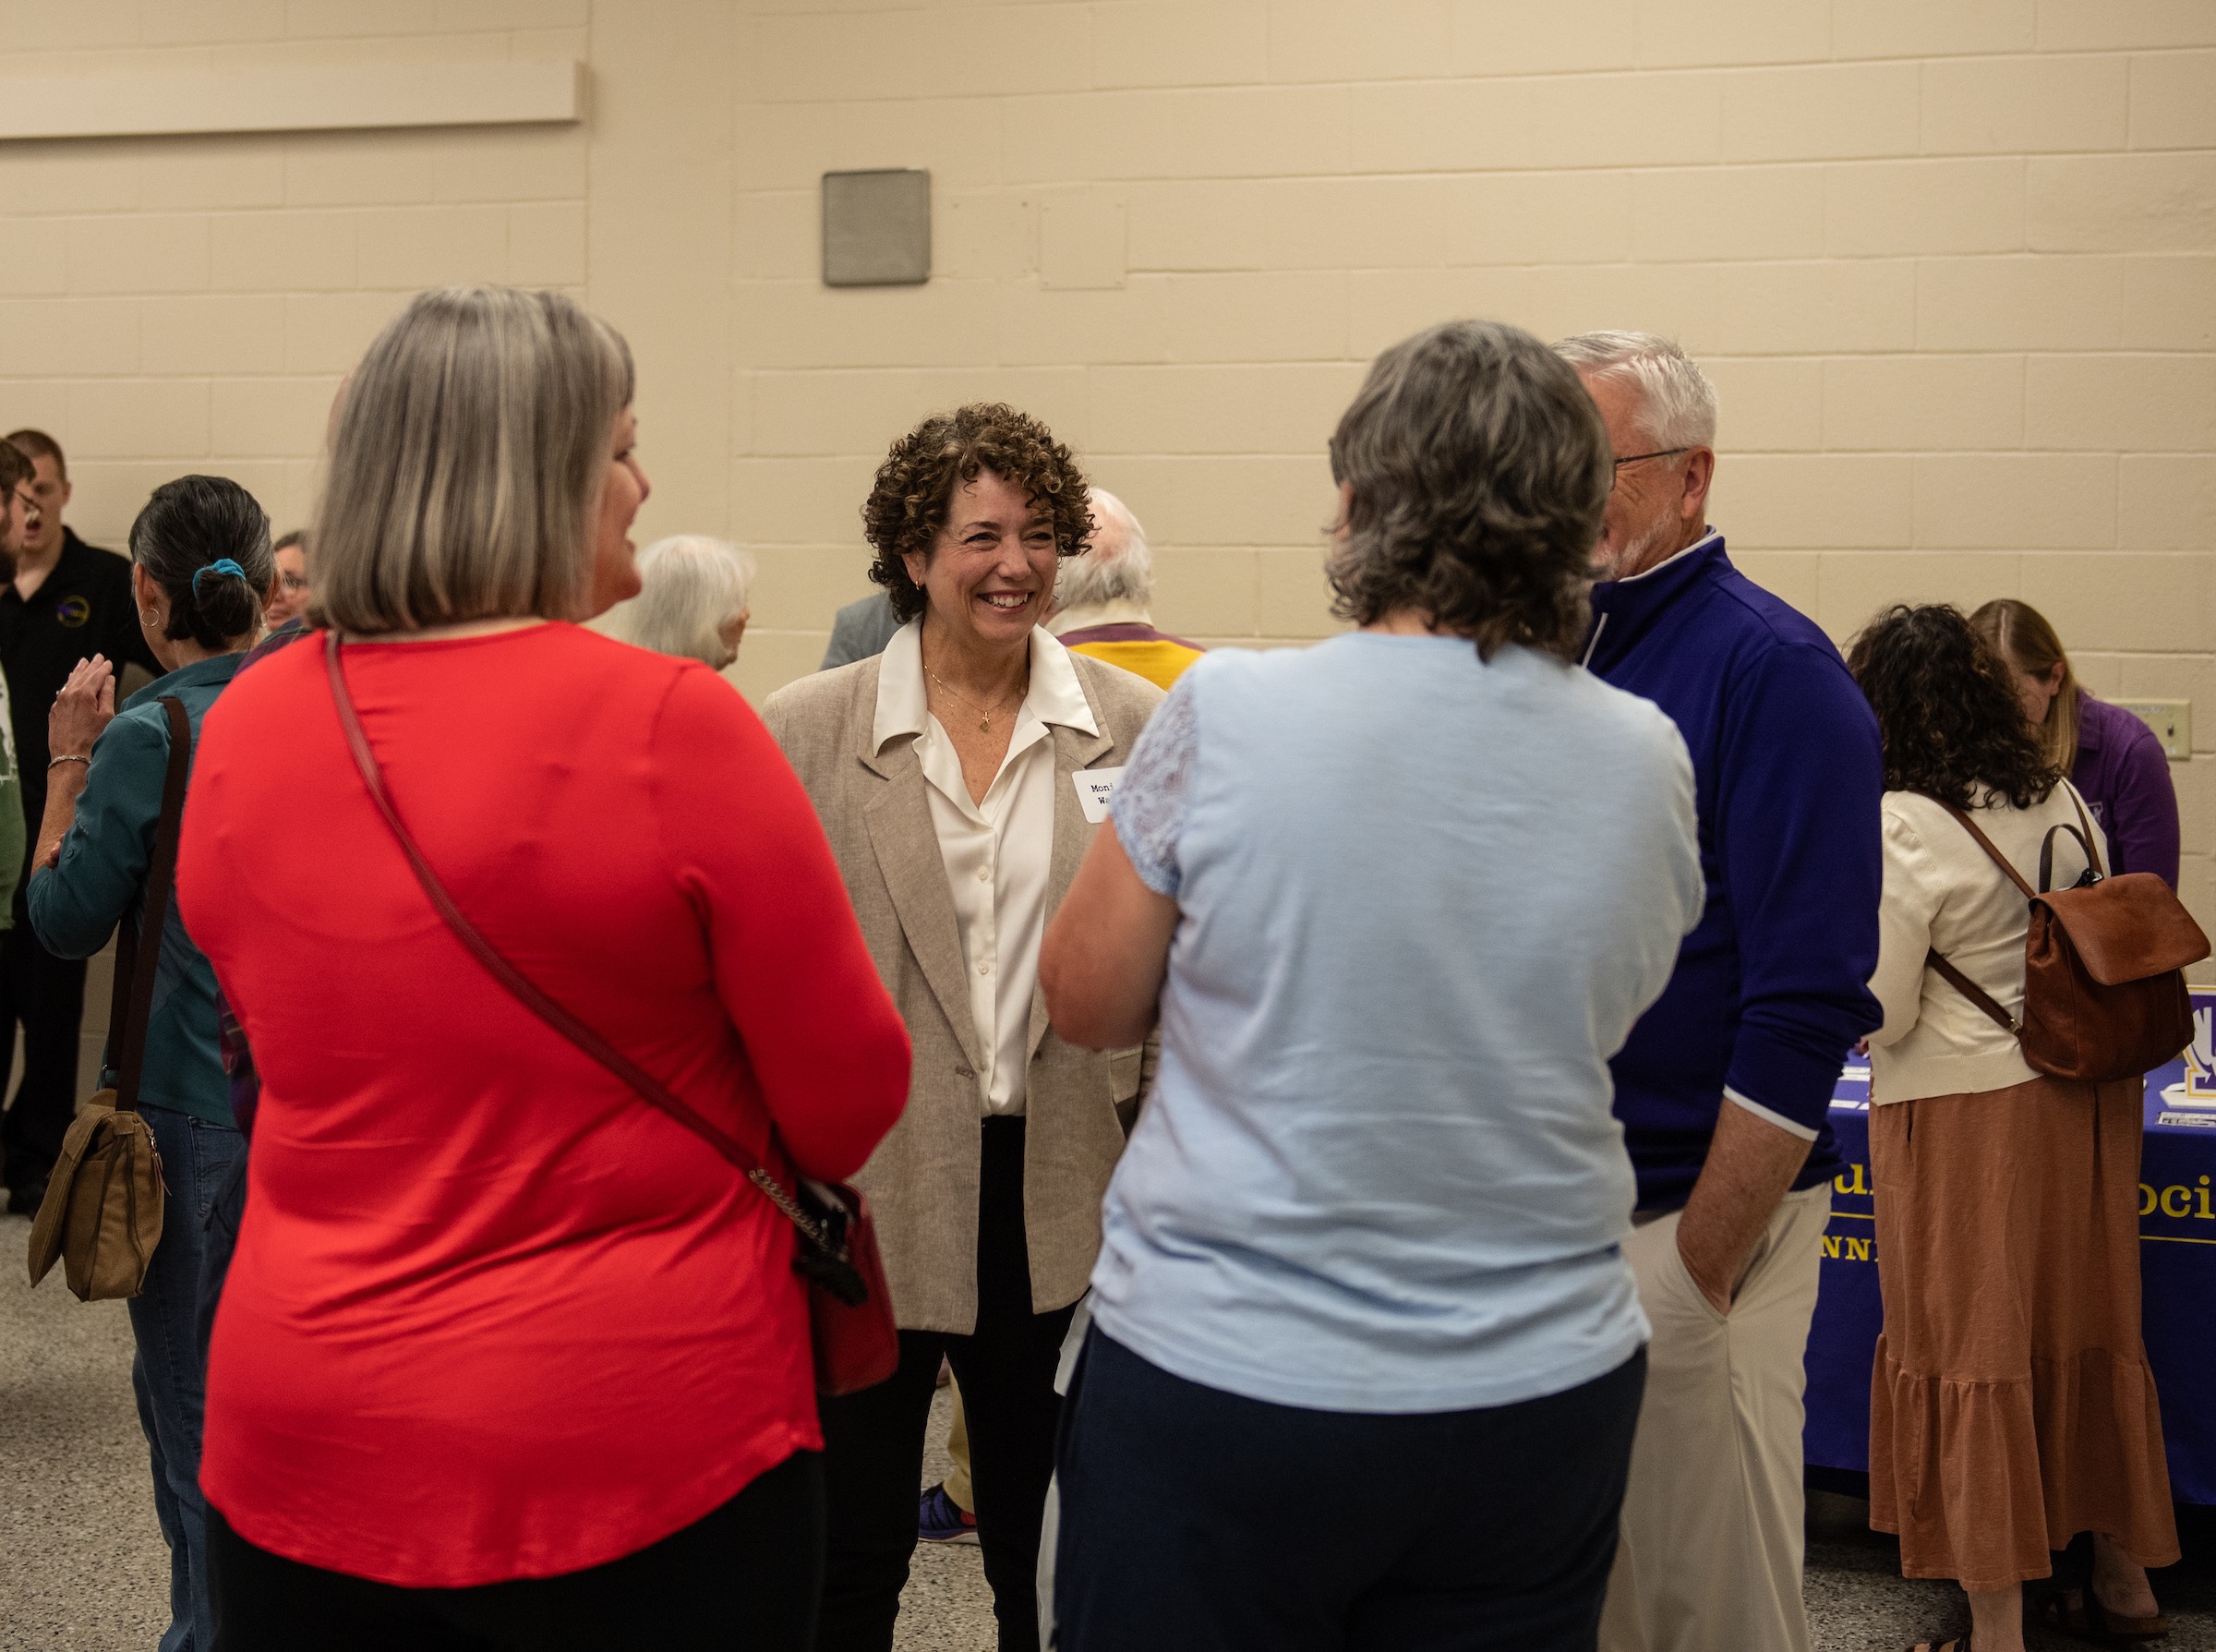 Monica Greppin Watts (center), a former Oracle staff member and the university's former associate vice president for communication and marketing, speaks with Tech President Phil Oldham (right) and other guests at the university's reunion event.